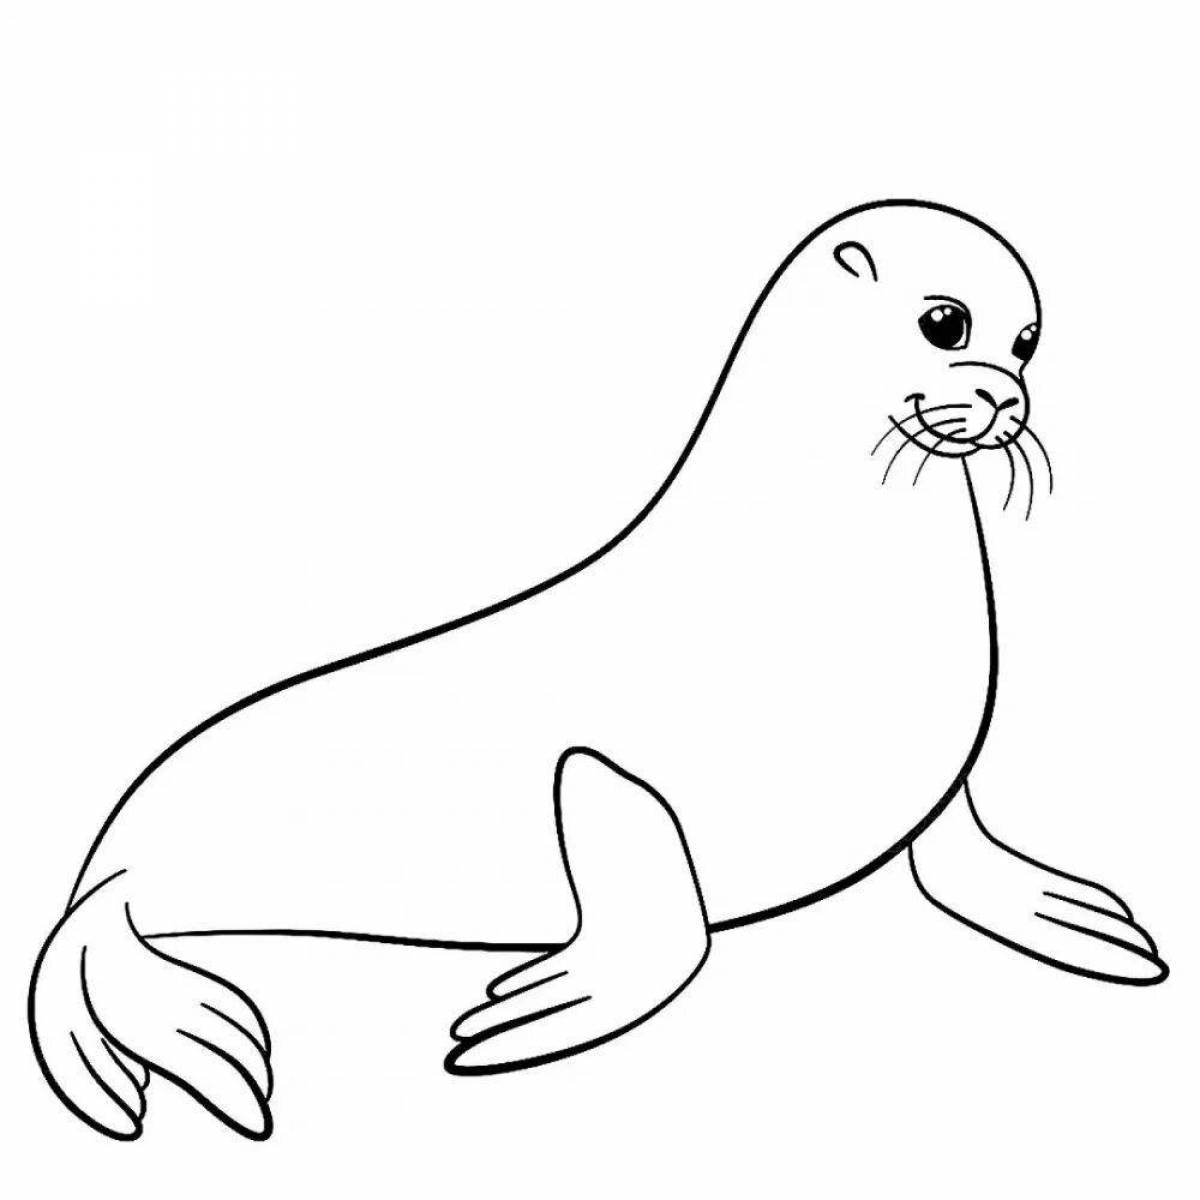 Adorable seal coloring book for kids